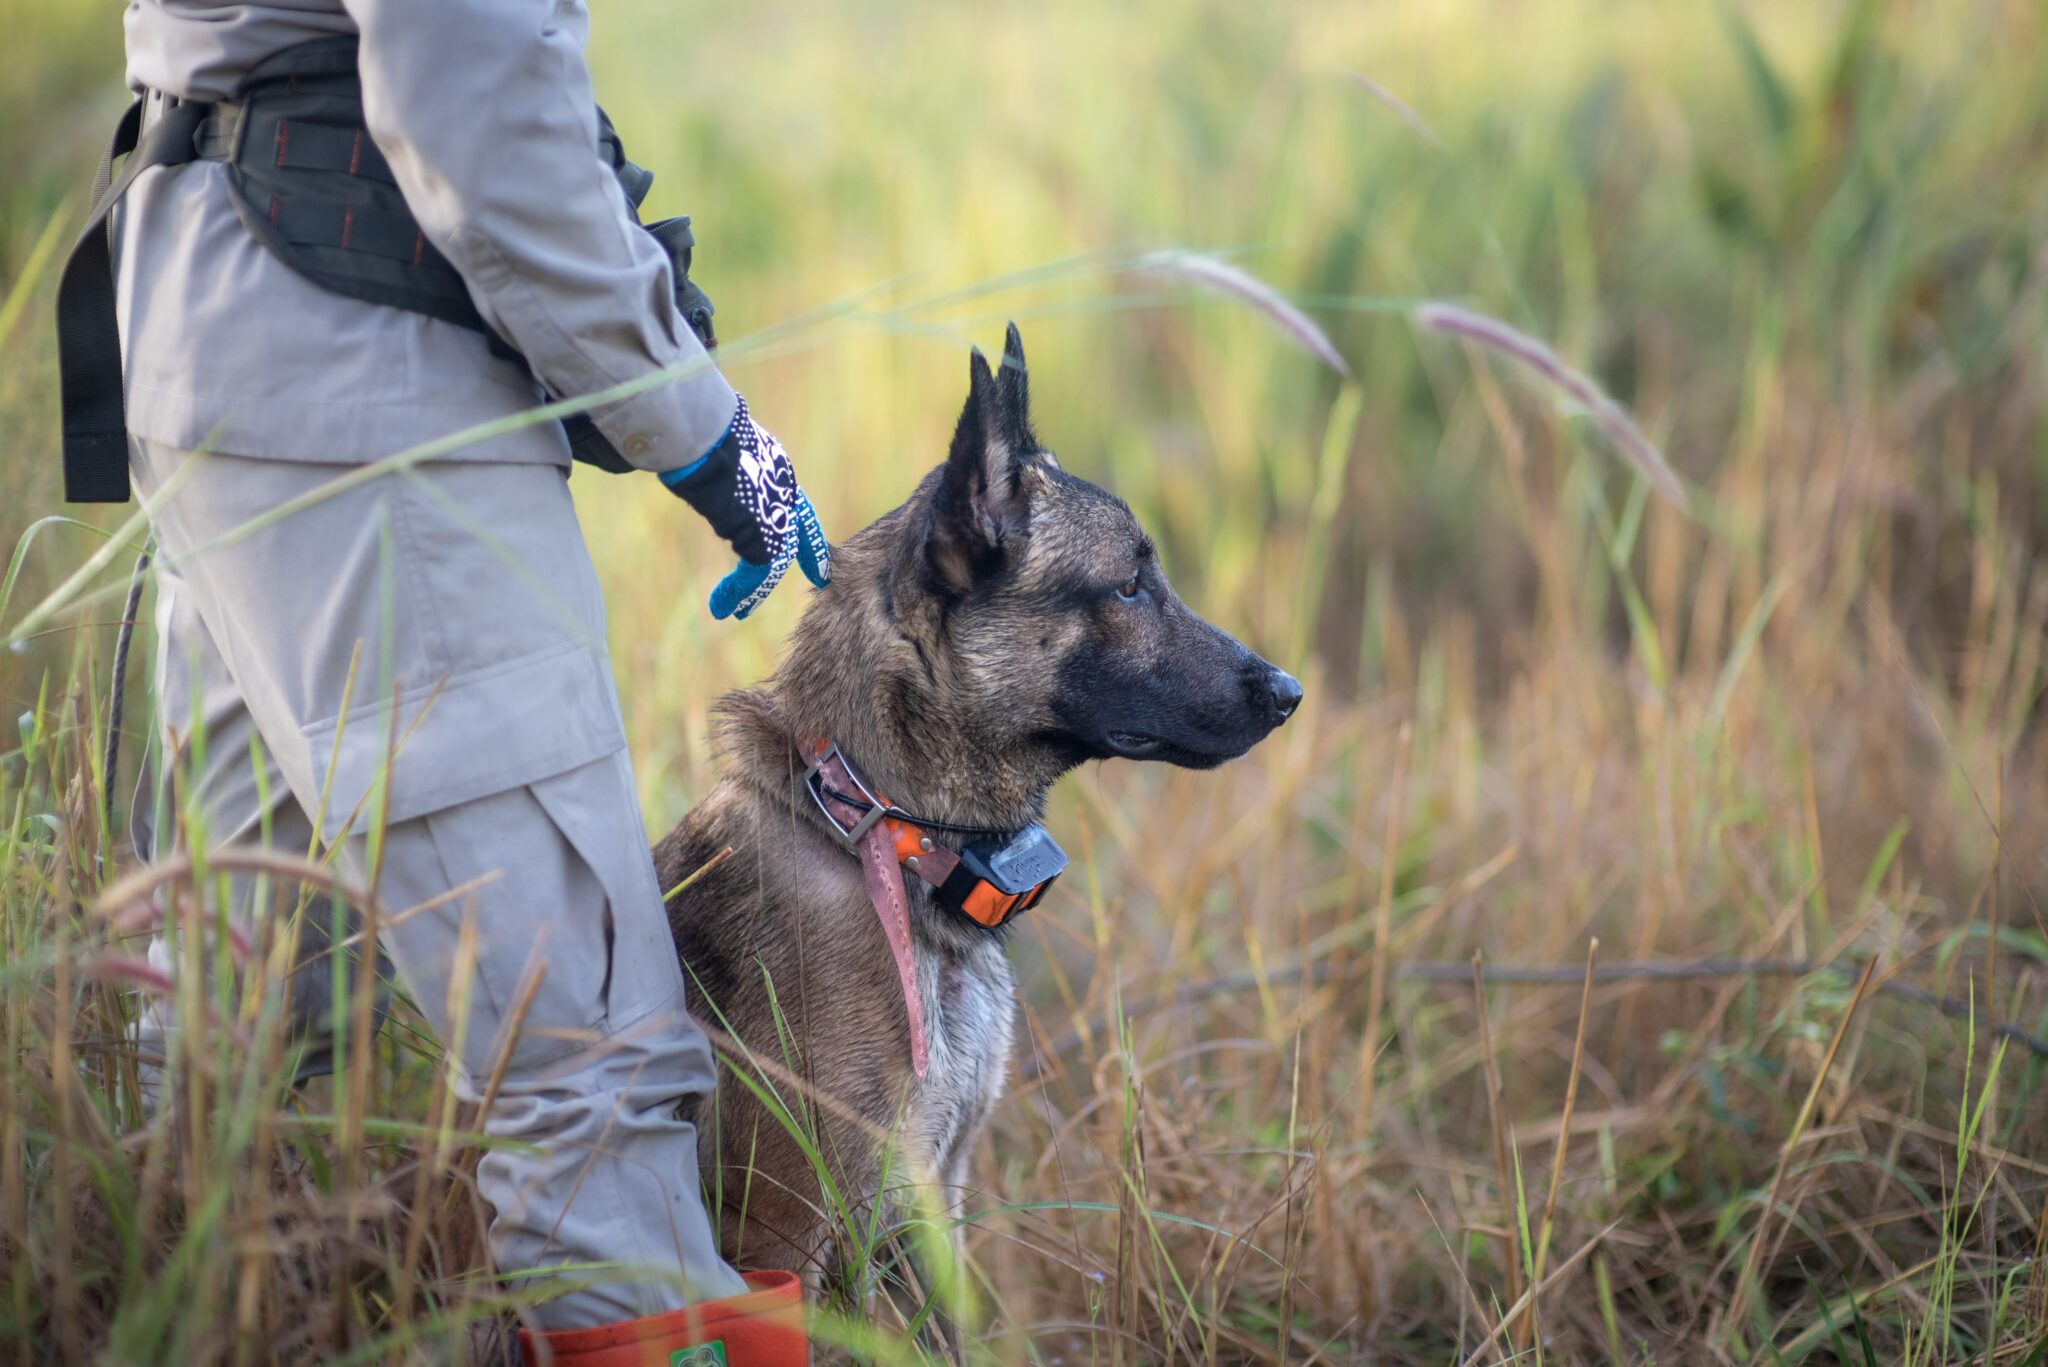 Flanders Government Grants APOPO €1 Million for Landmine Clearance in Ukraine using HeroDOGs